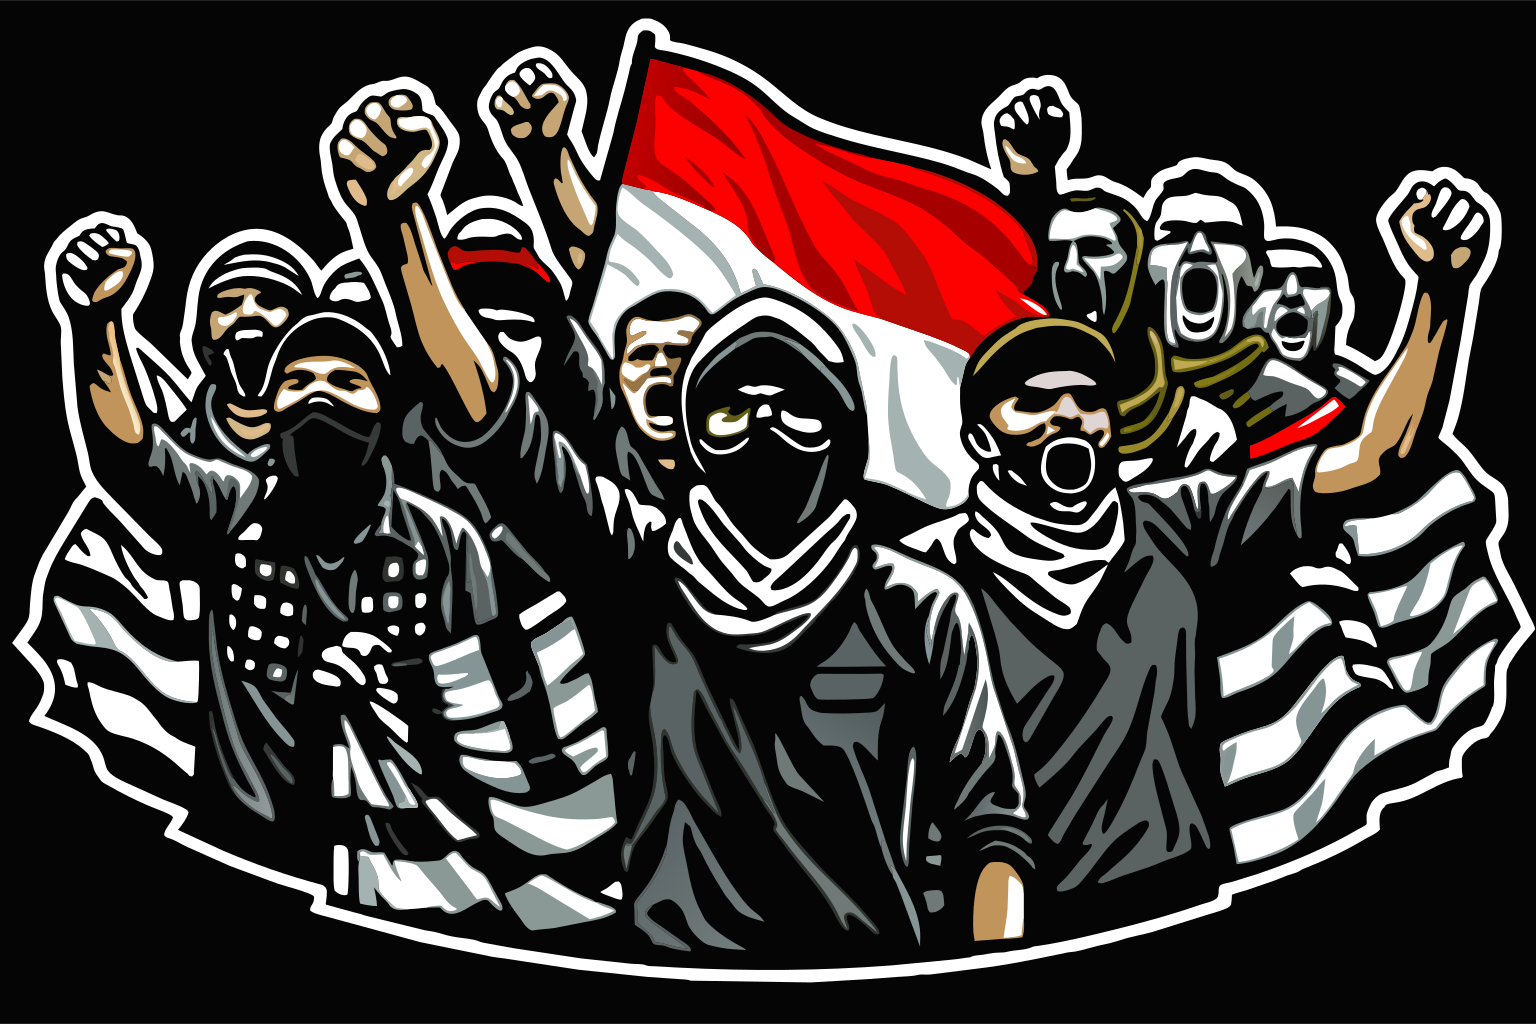 casual ultras, football holigans supporters, In the background is indonesian flag, The overall composition is a skillful combination, linocut, black and white, lineart,  hardlines